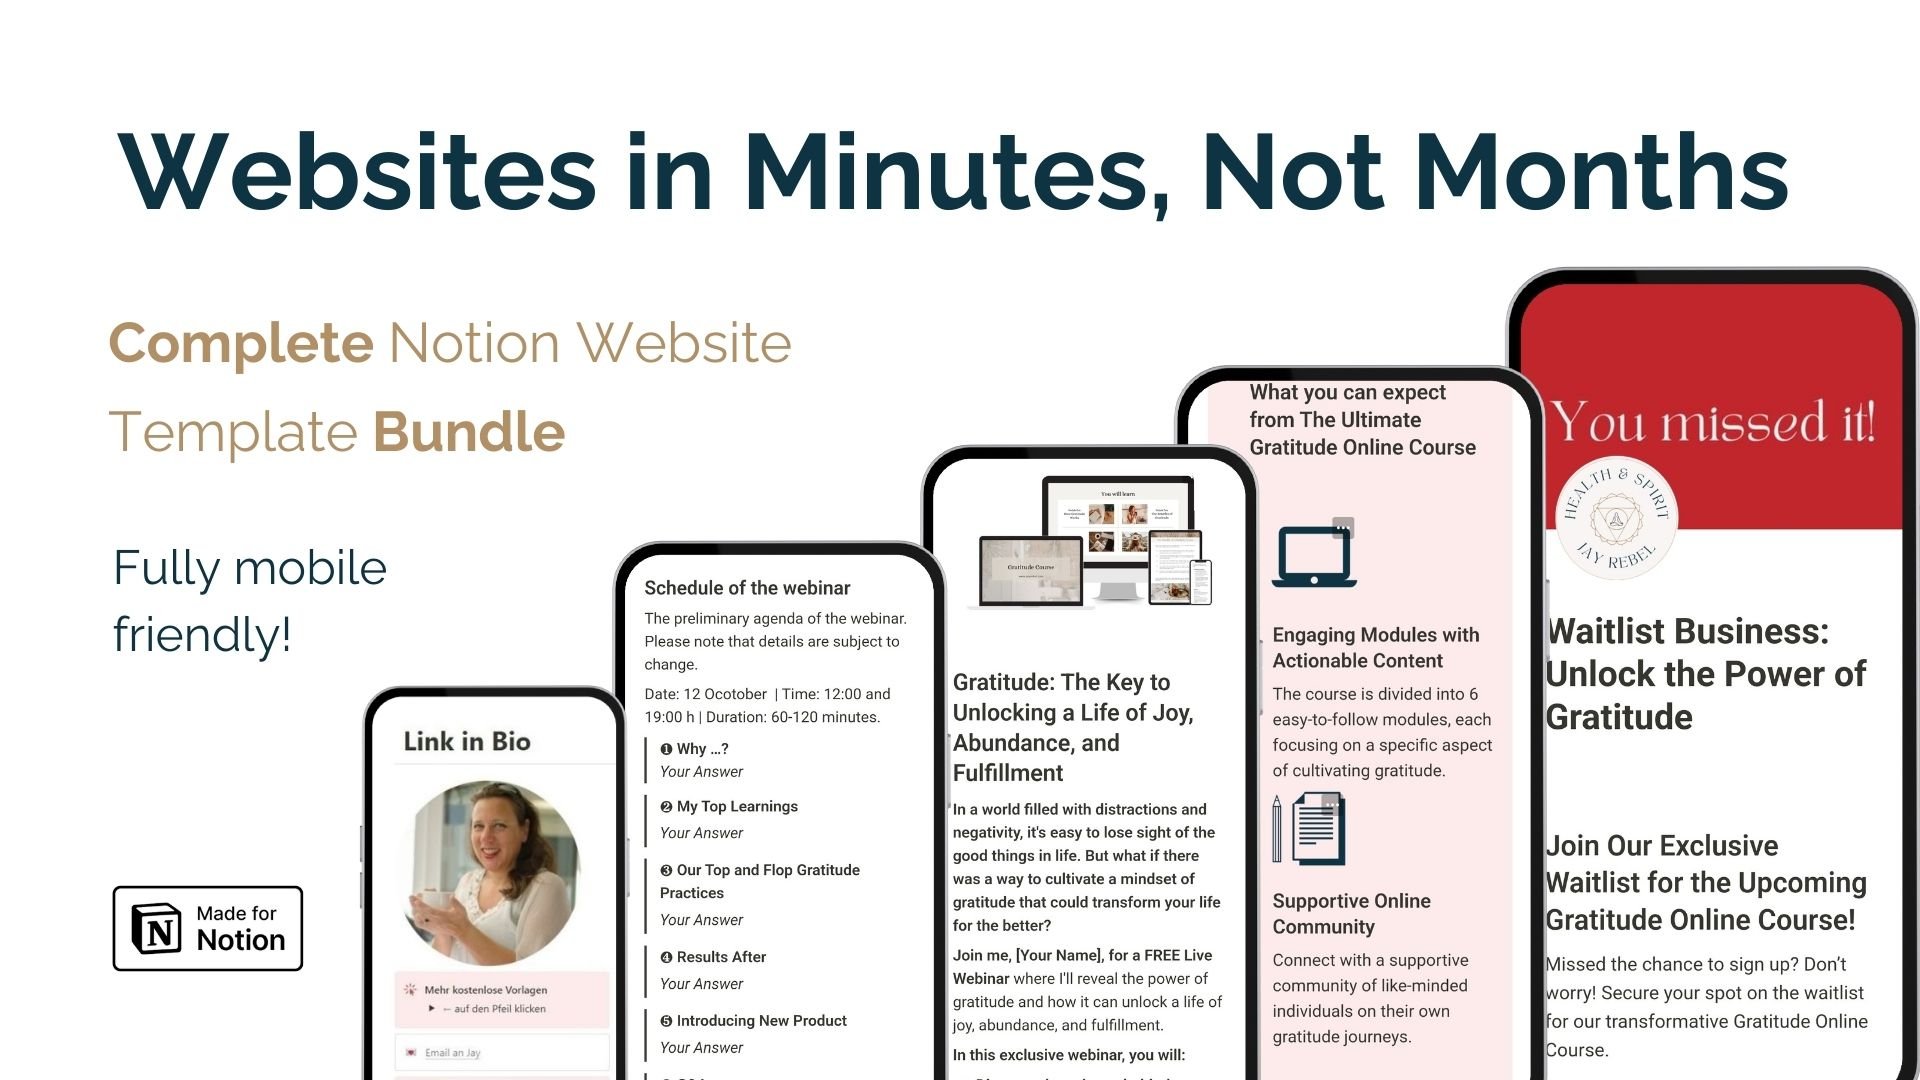 A bundle of 5 Website Templates for Notion.

Don't get lost in complex website builders! This drag-and-drop Notion Website Template makes creating a professional homepage as easy as sending an email.

Build Powerful Website Pages Directly in Notion.

No coding required.